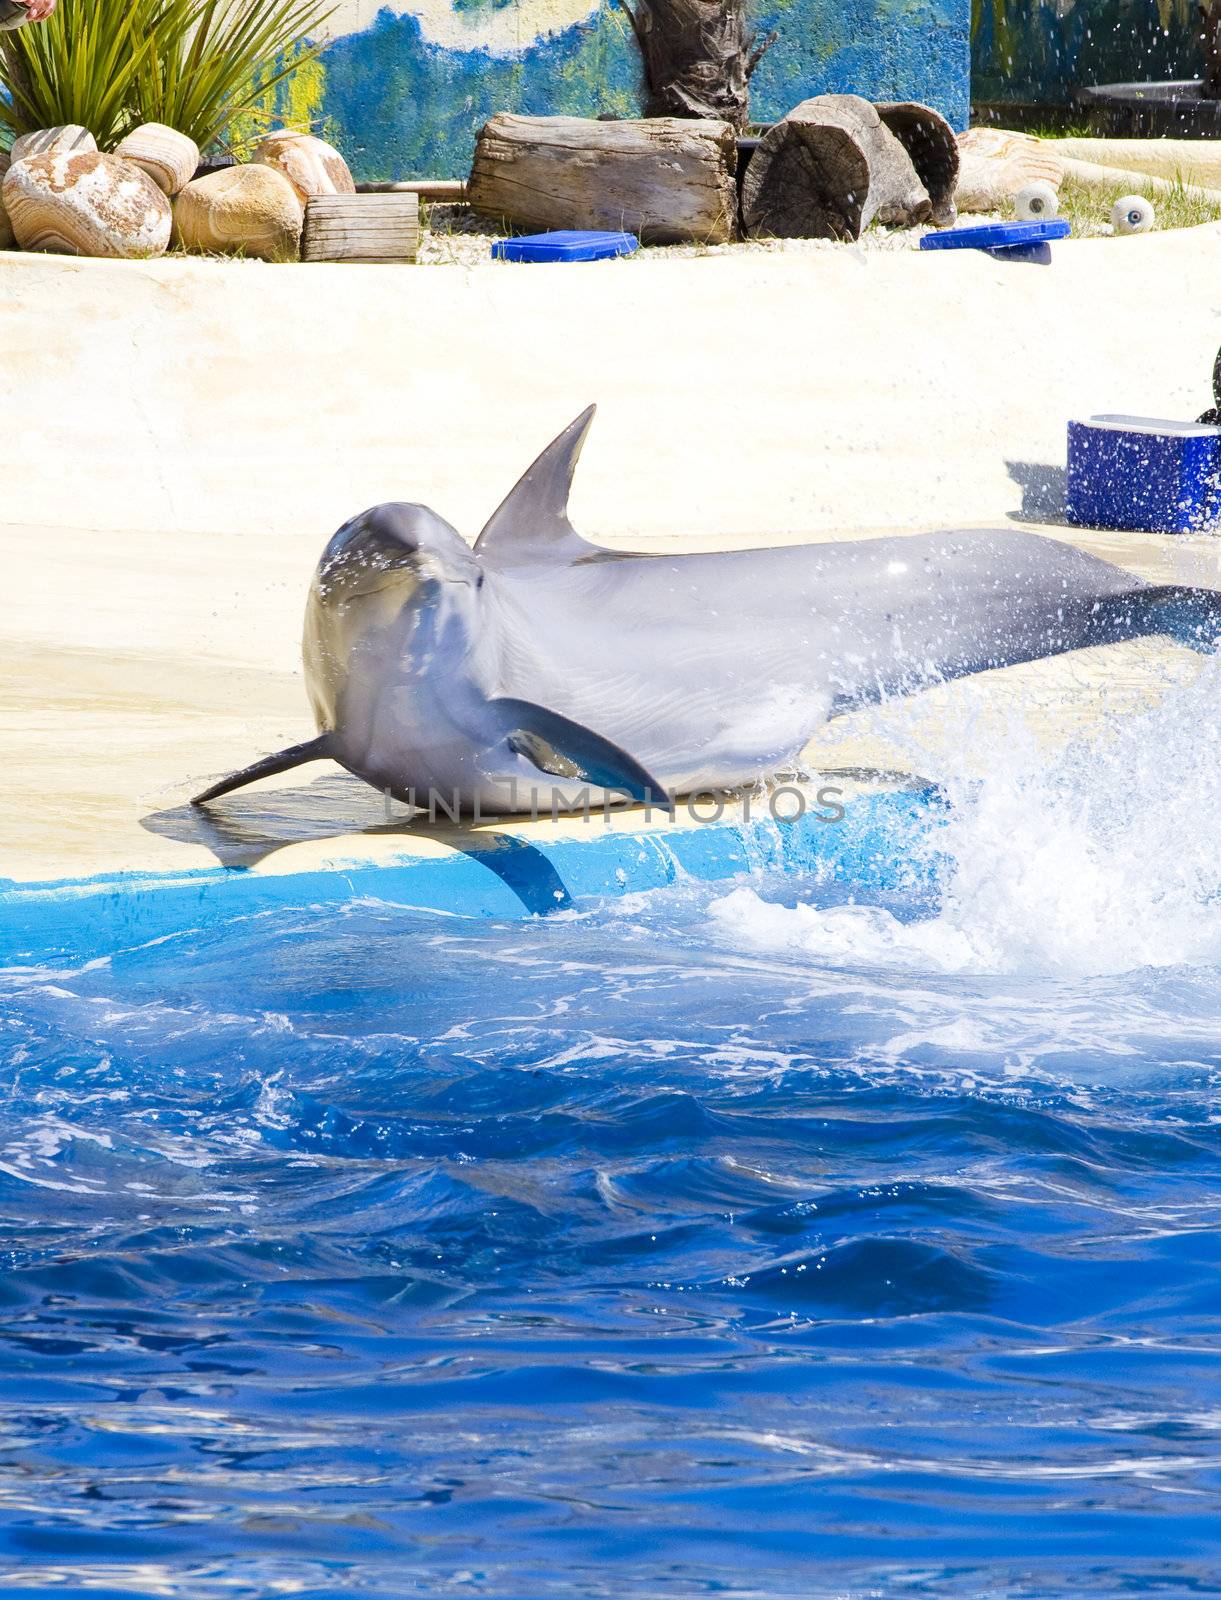 dolphin jump out of the water in sea by FernandoCortes